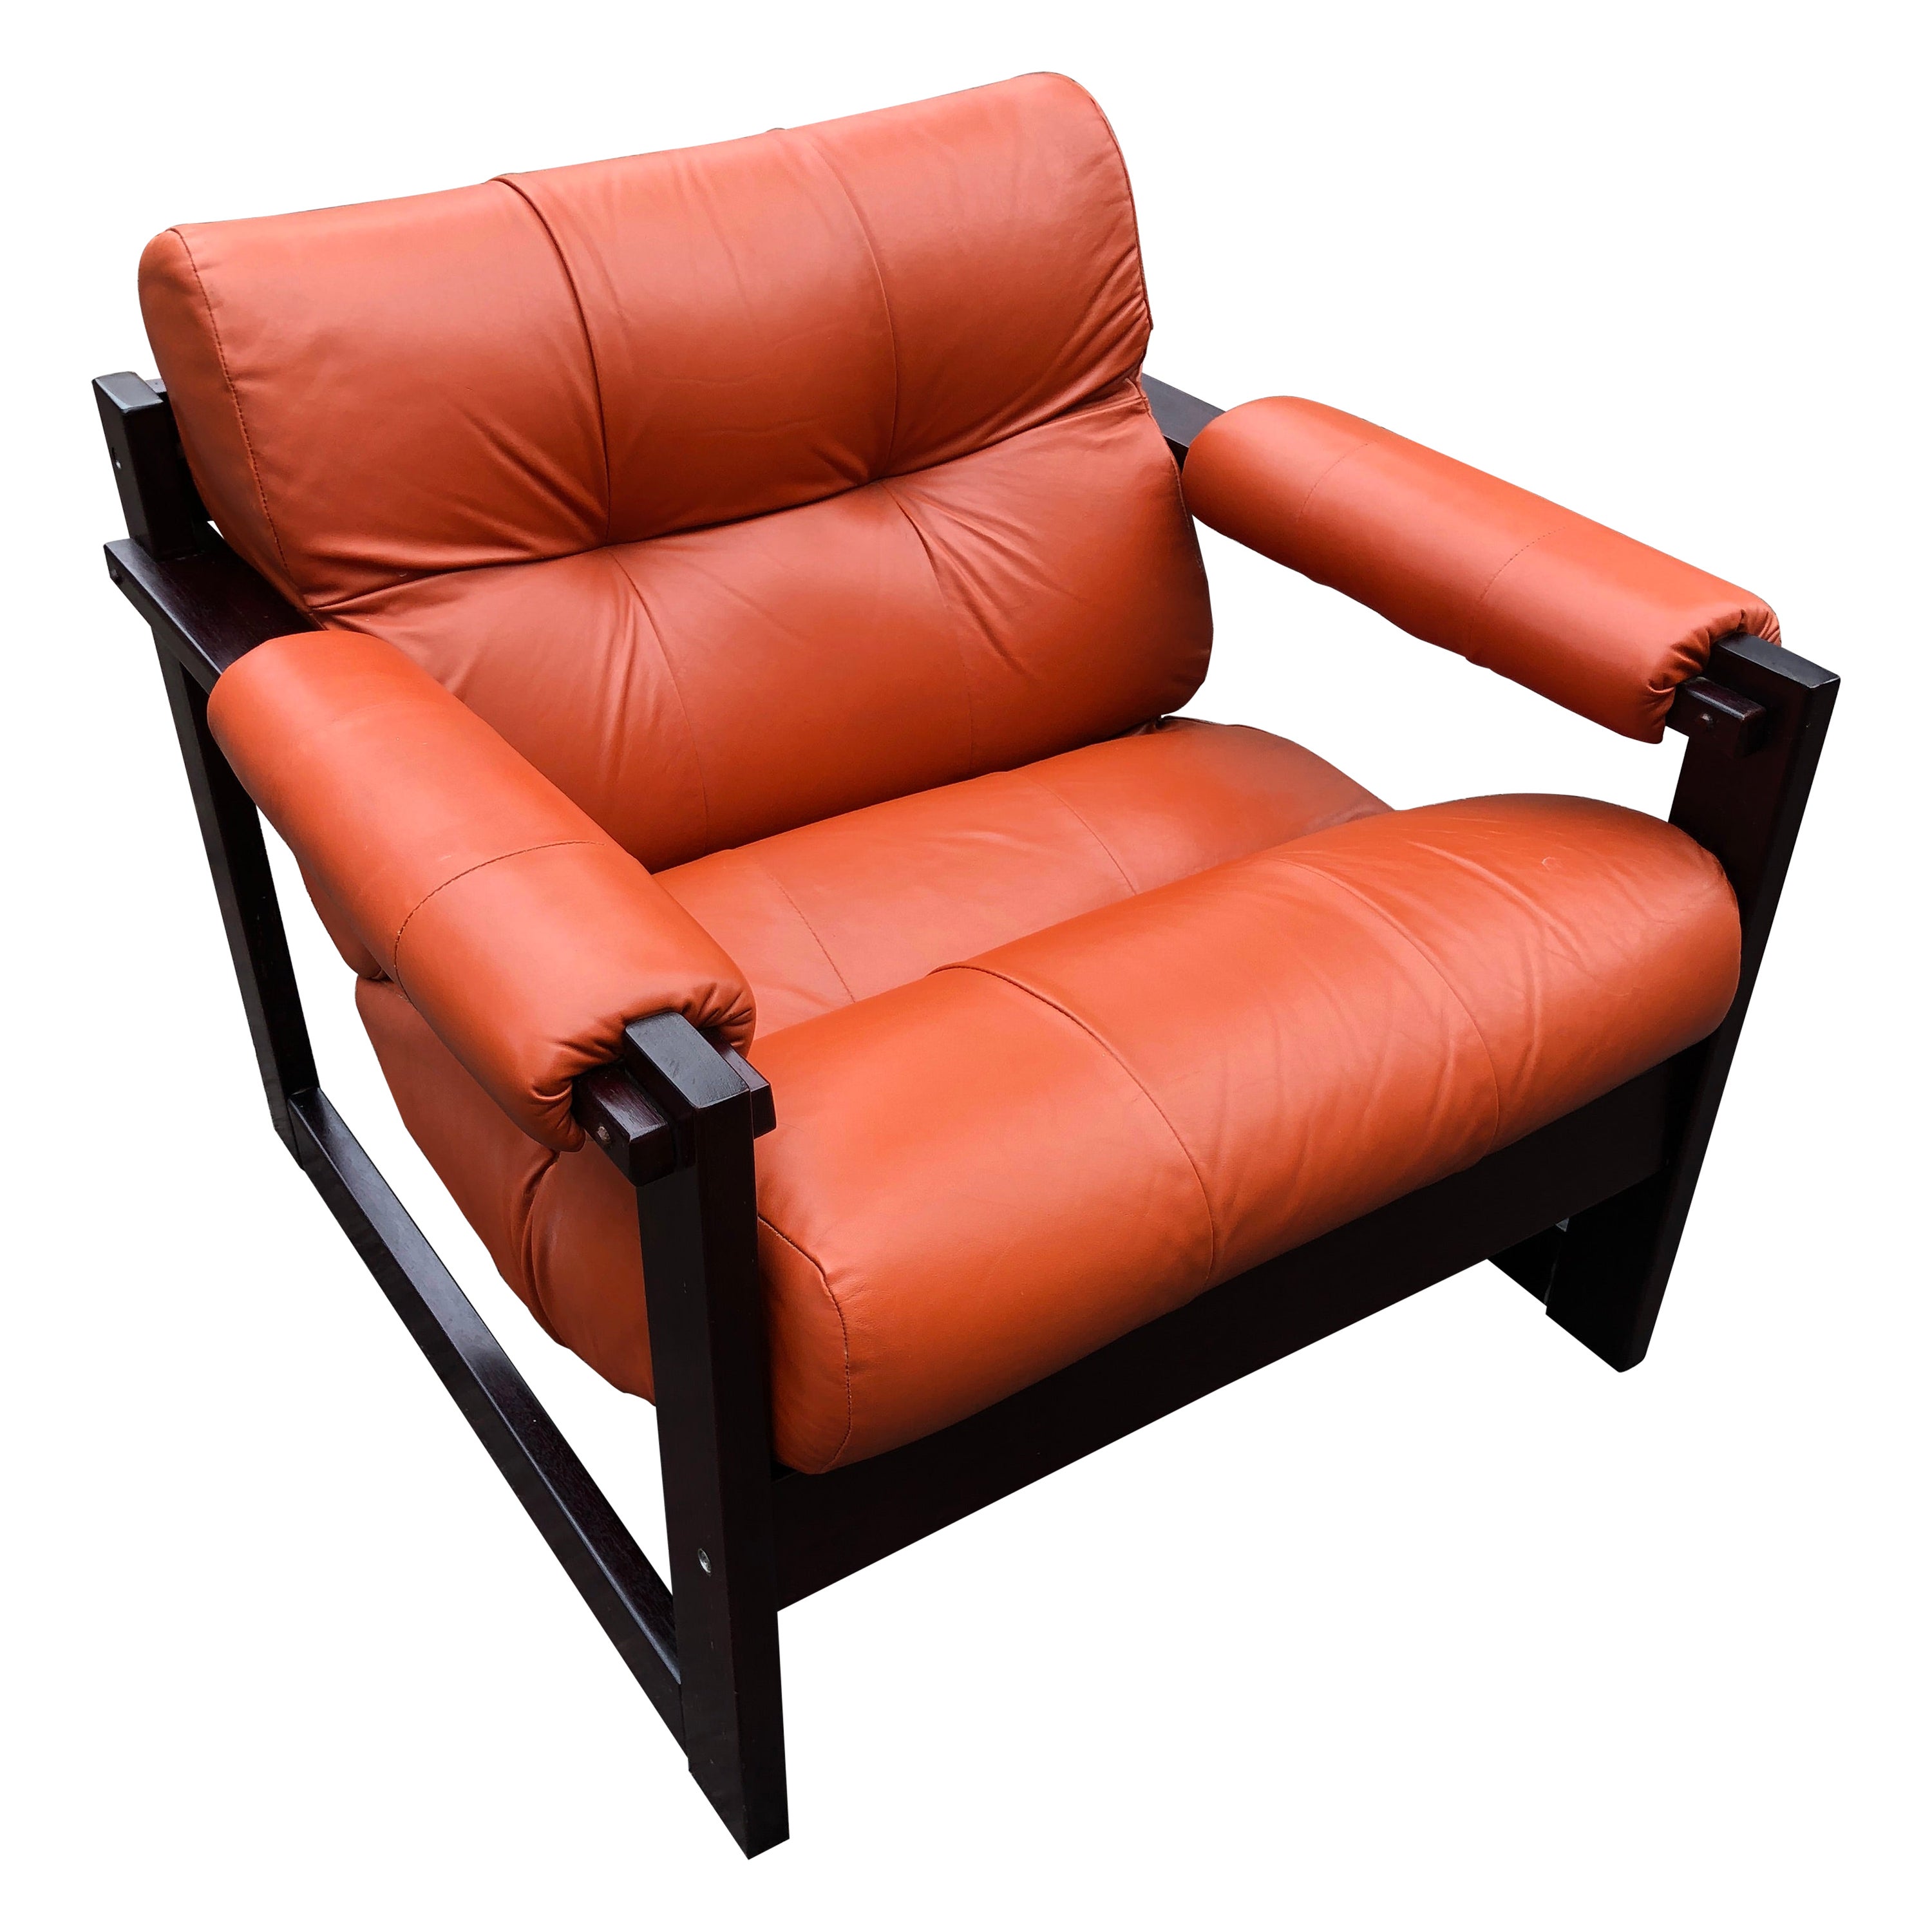 Wonderful Percival Lafer "S-1" Leather Brazilian Rosewood Lounge Chair 